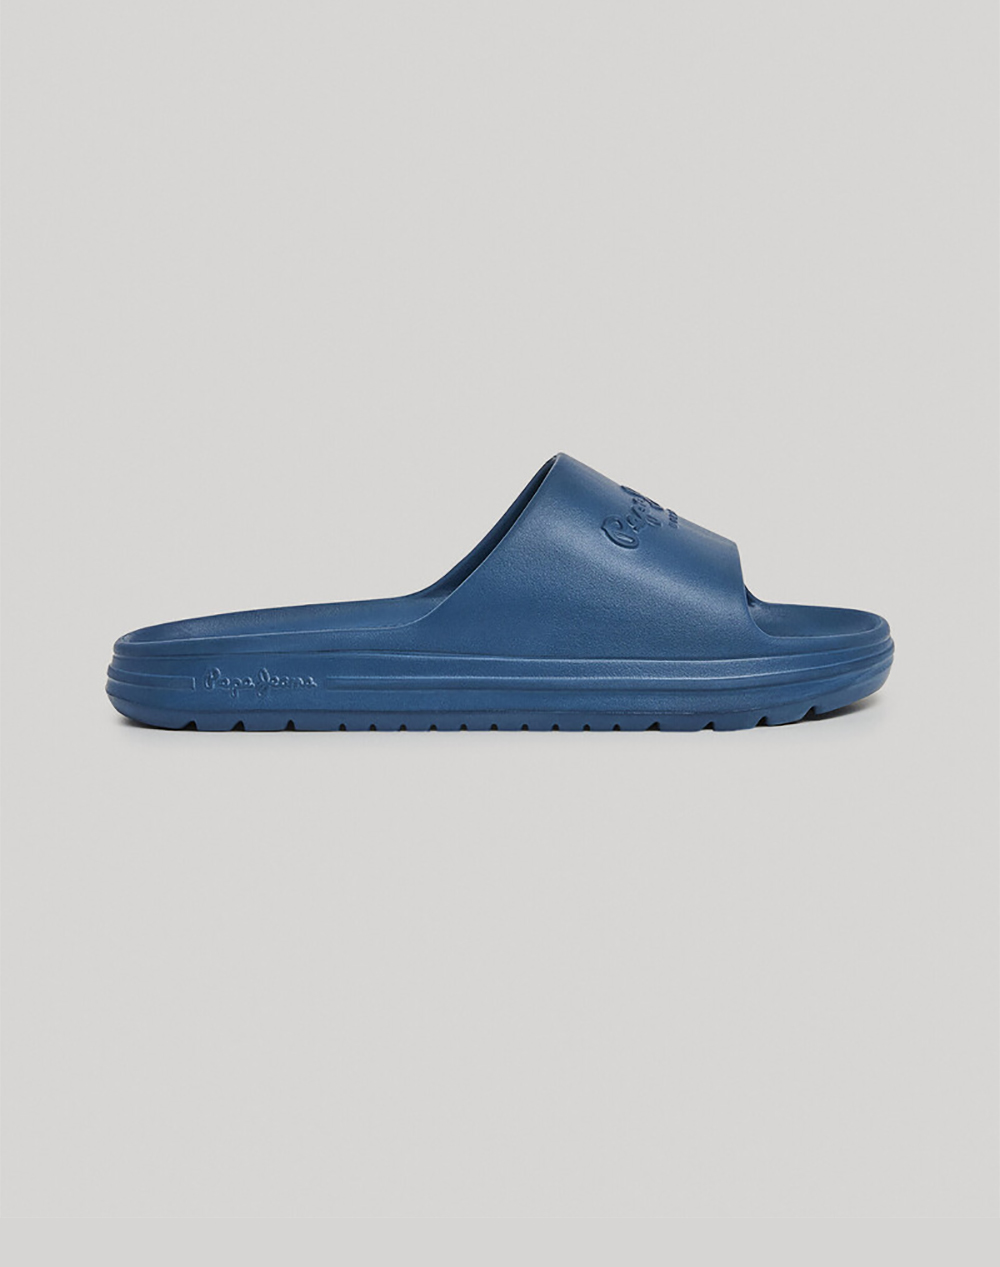 PEPE JEANS SOLD OUT DROP 1 BEACH SLIDE M BEACH ΠΑΠΟΥΤΣΙ ΑΝΔΡΙΚΟ PMS70159-599 Blue